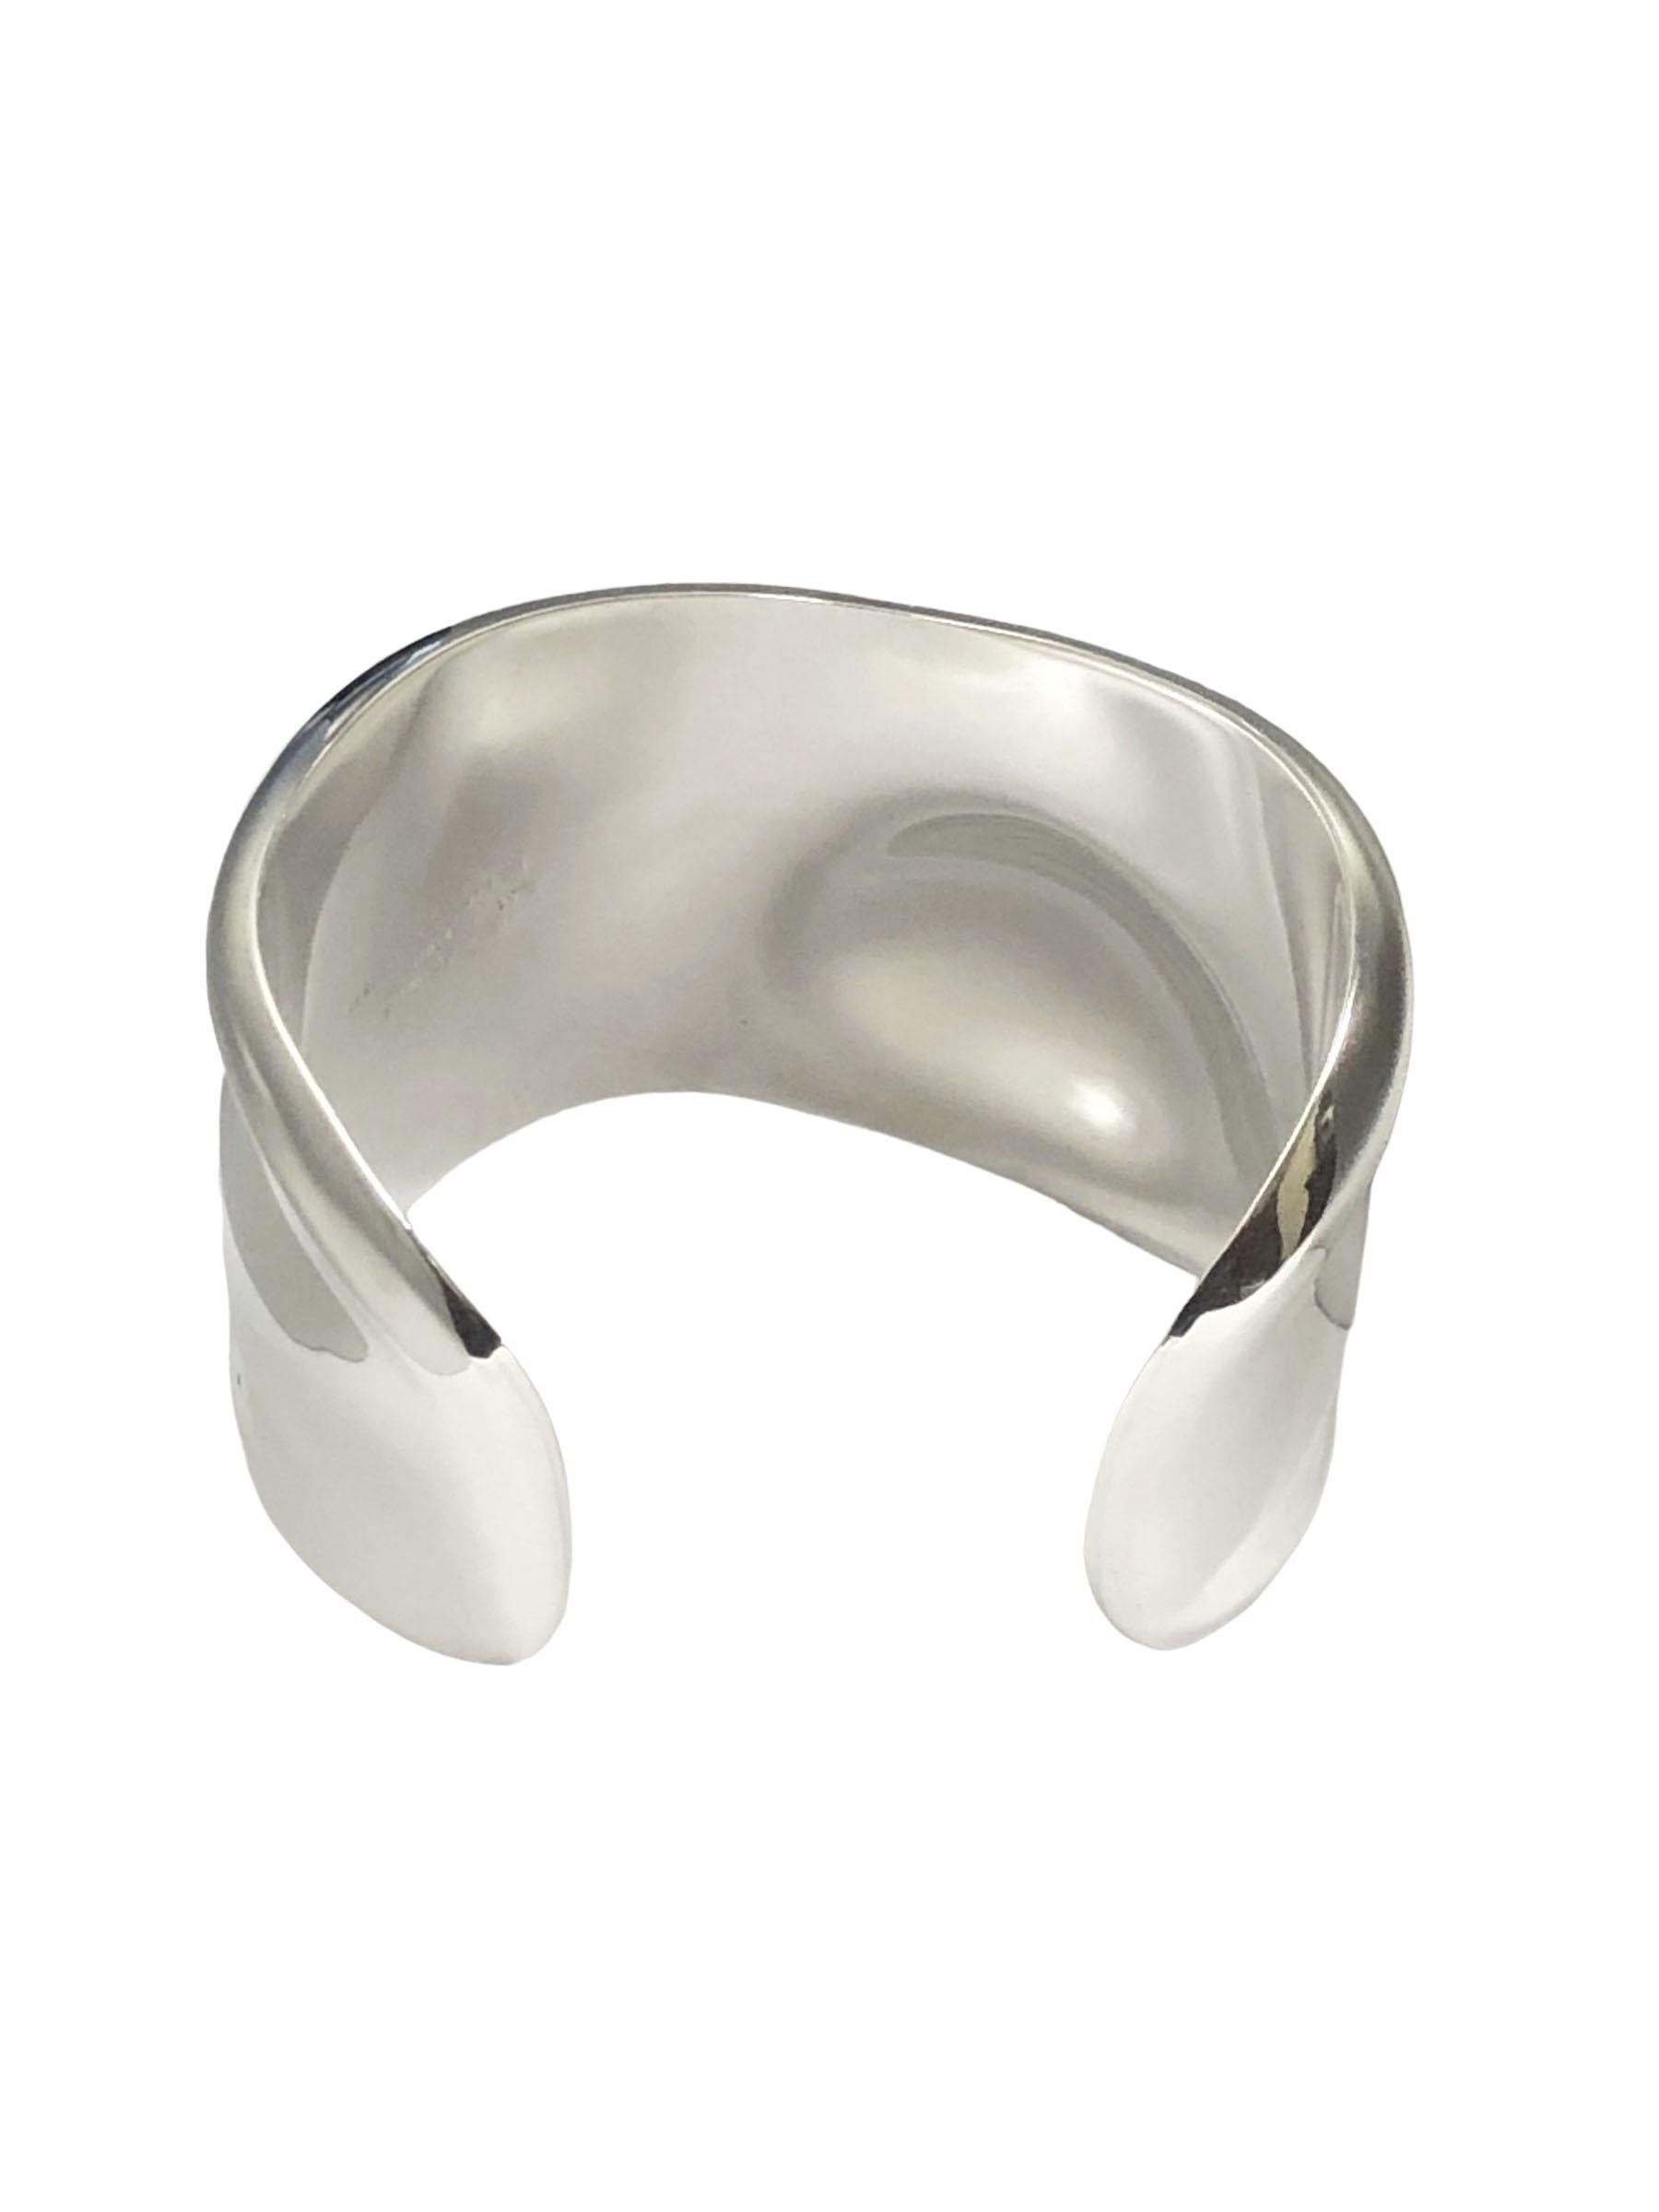 Circa 1975 Elsa Peretti for Tiffany & Co., Sterling Silver Bone Cuff Bracelet. Measuring 2 inches at its widest point, an opening of 1 inch and is plyable to be opened a bit more. Inside measurement of approximately 6 1/8 inch, This is the medium to